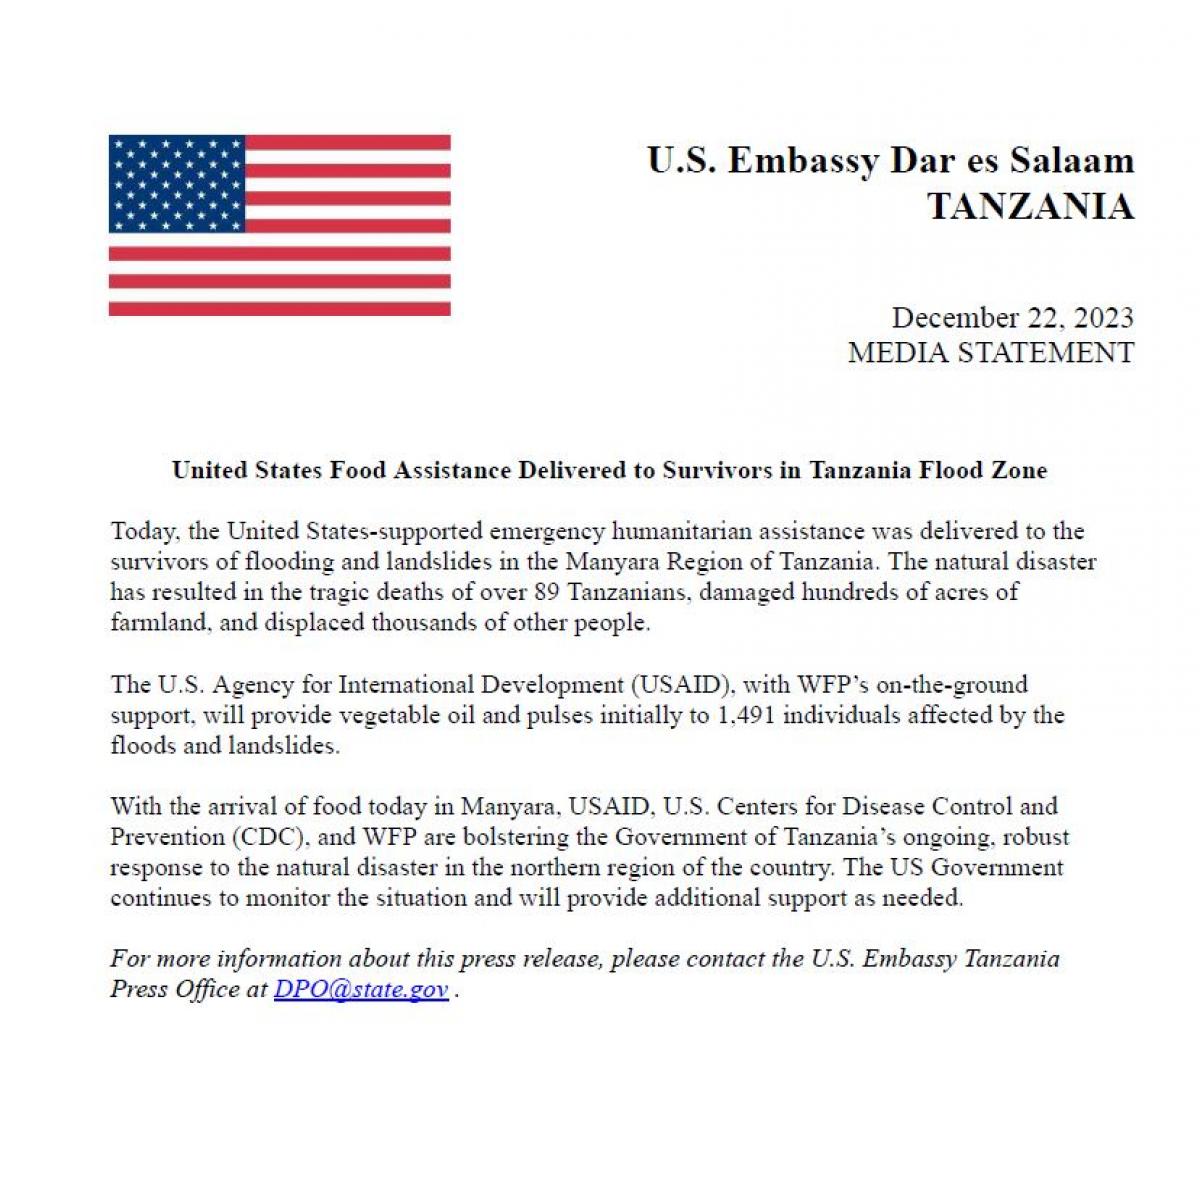 United States Food Assistance Delivered to Survivors in Tanzania Flood Zone